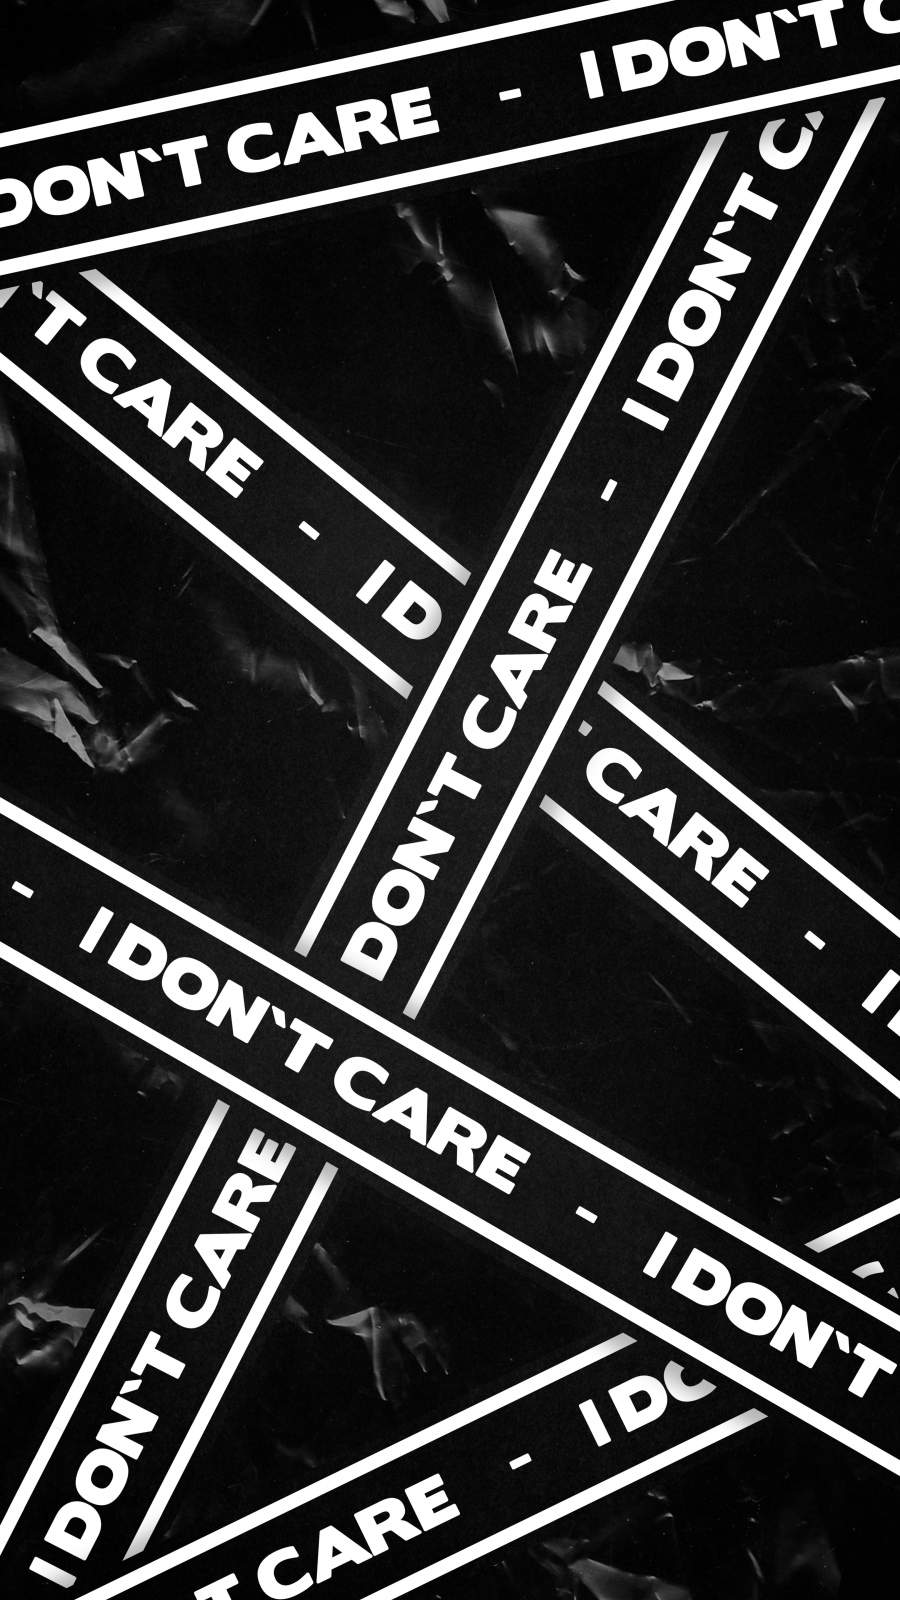 I Dont Care IPhone Wallpaper - IPhone Wallpapers : iPhone Wallpapers